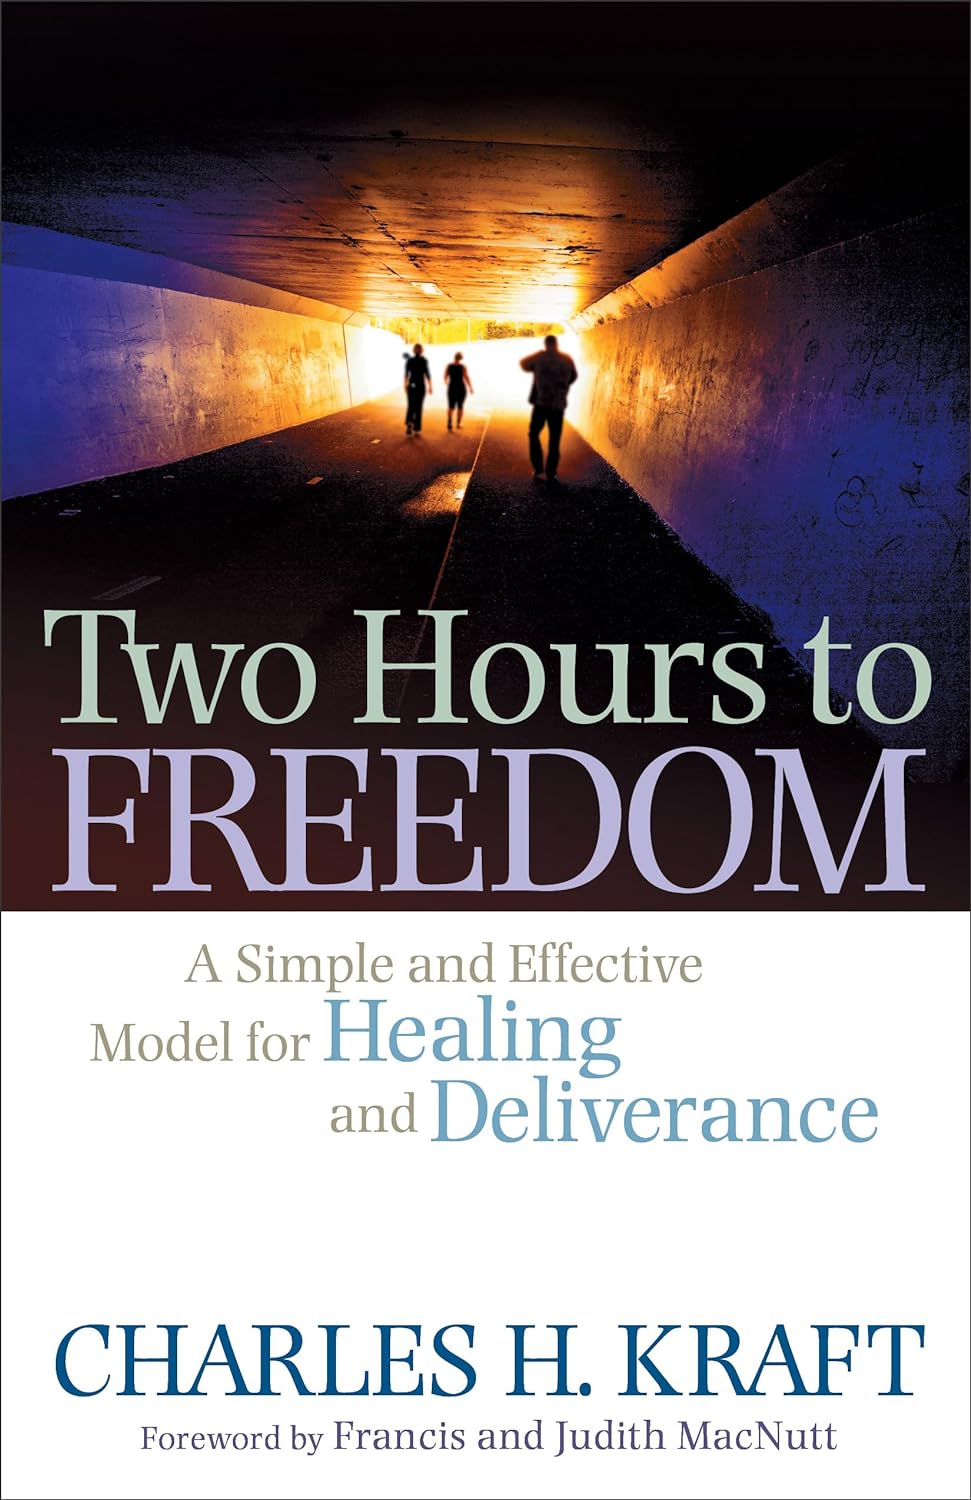 Two hours to freedom: a simple and effective model for healing and deliverance by charles kraft